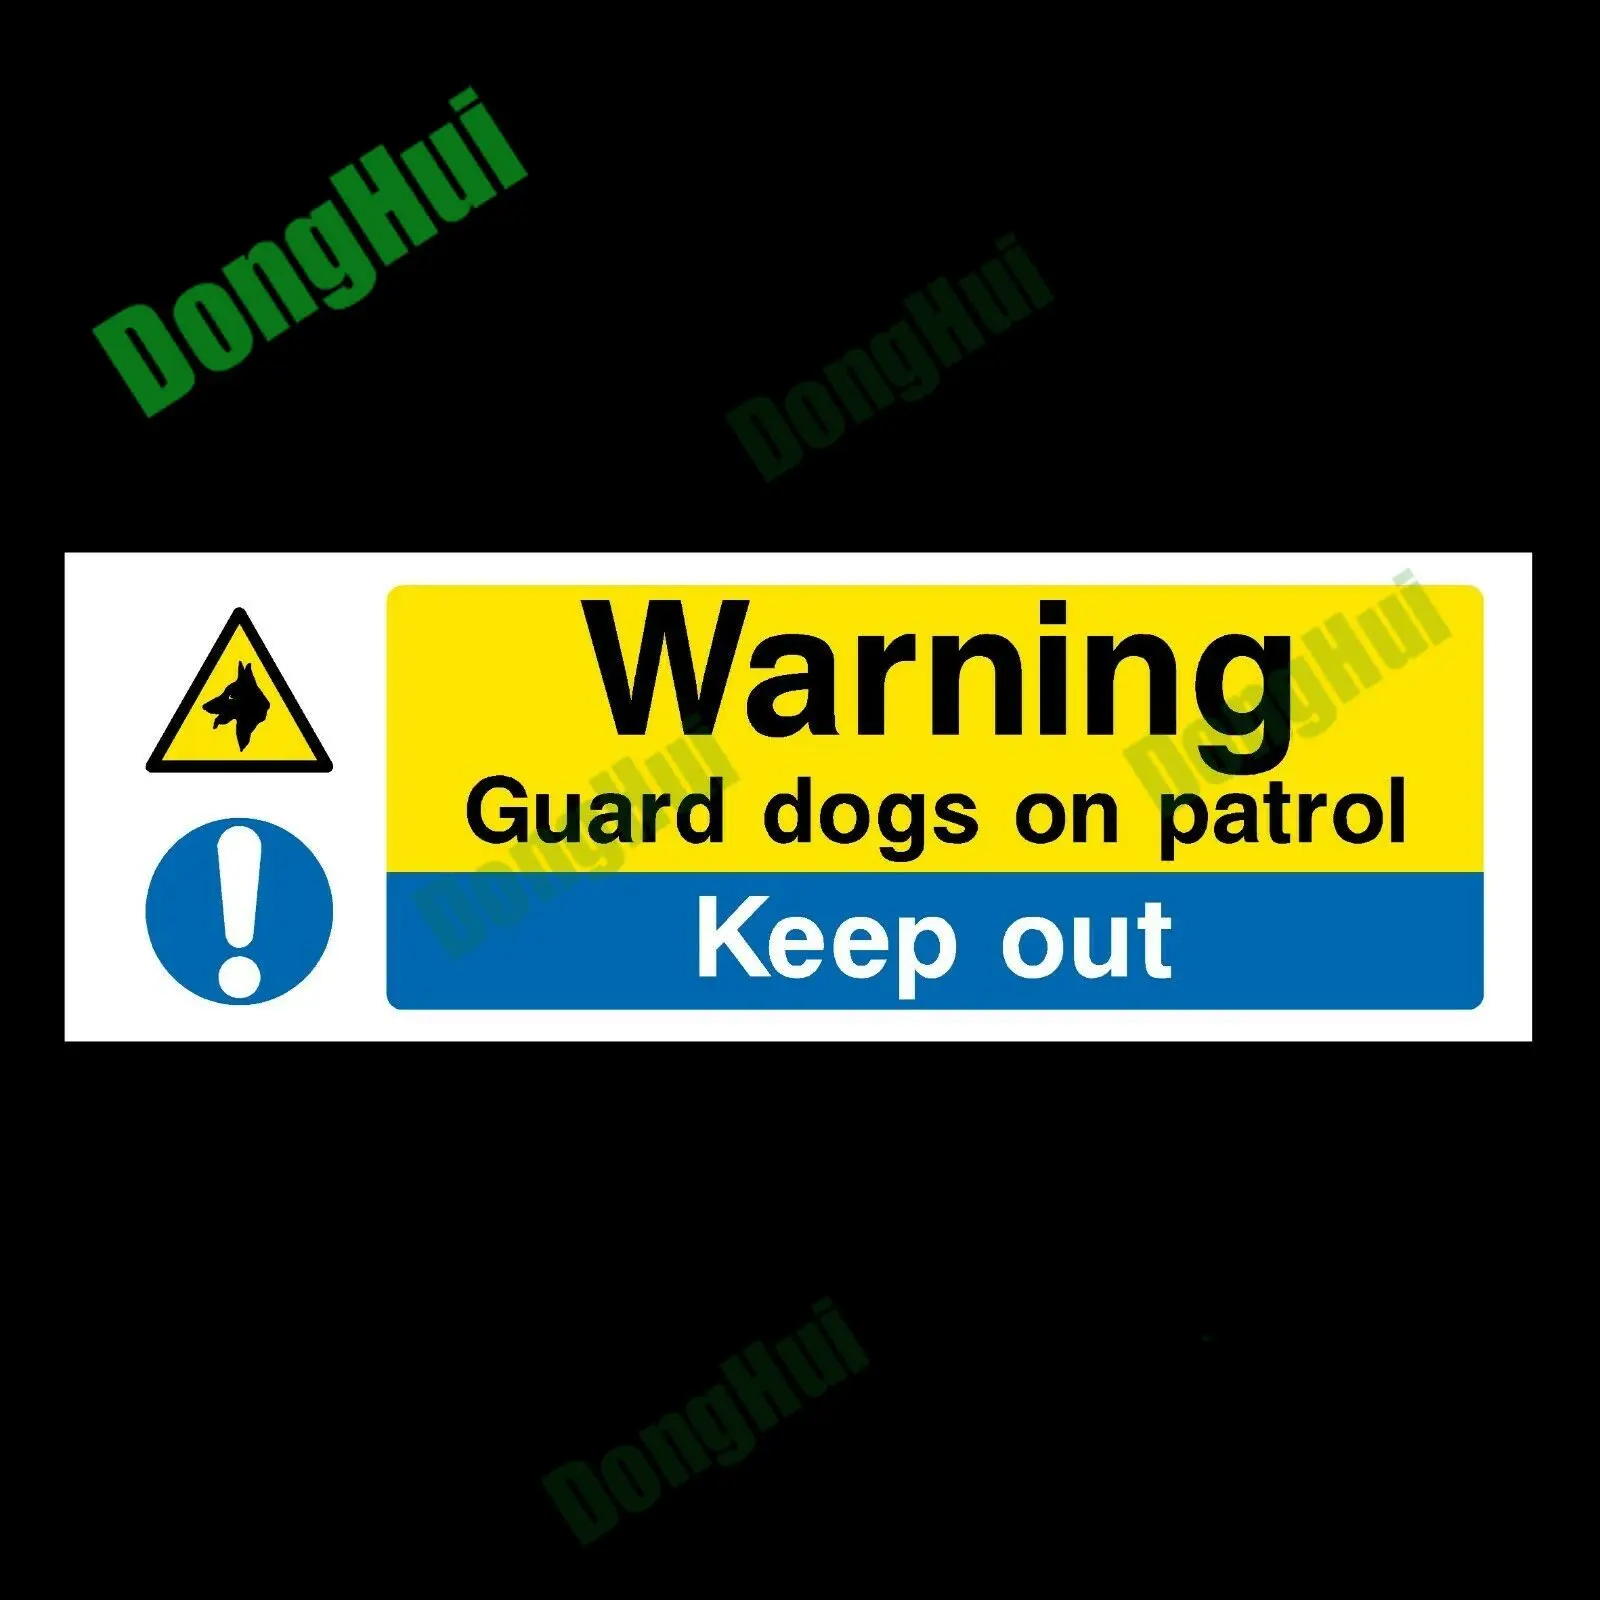 

Warning Guard Dogs on Patrol Keep Out Caution Danger Plastic Sign OR Sticker PVC Waterproof Car Sticker Car Window Decal